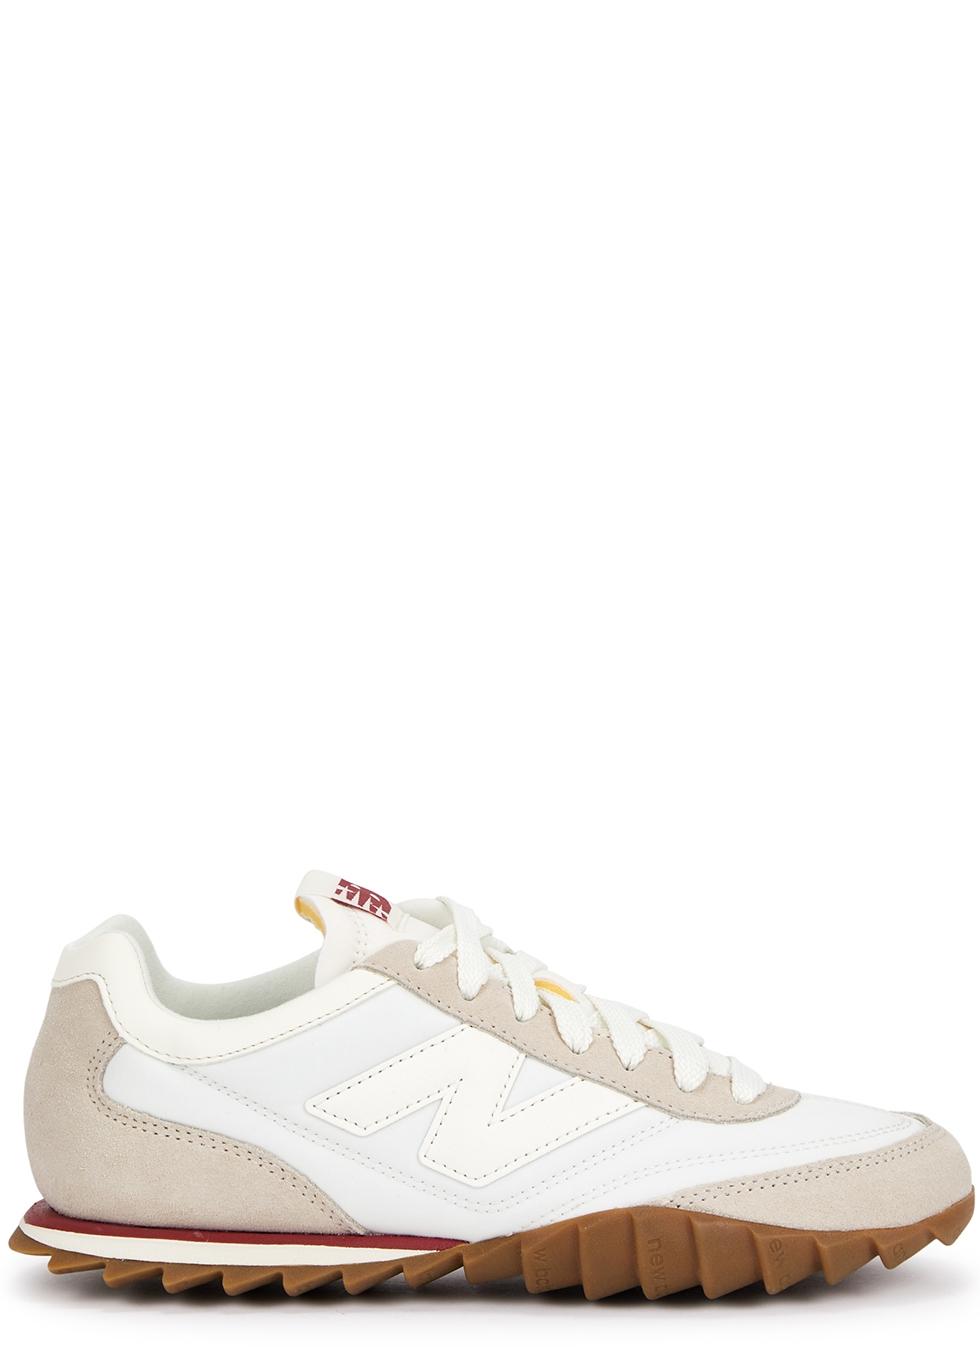 New Balance Rc30 Panelled Nylon Sneakers in White | Lyst